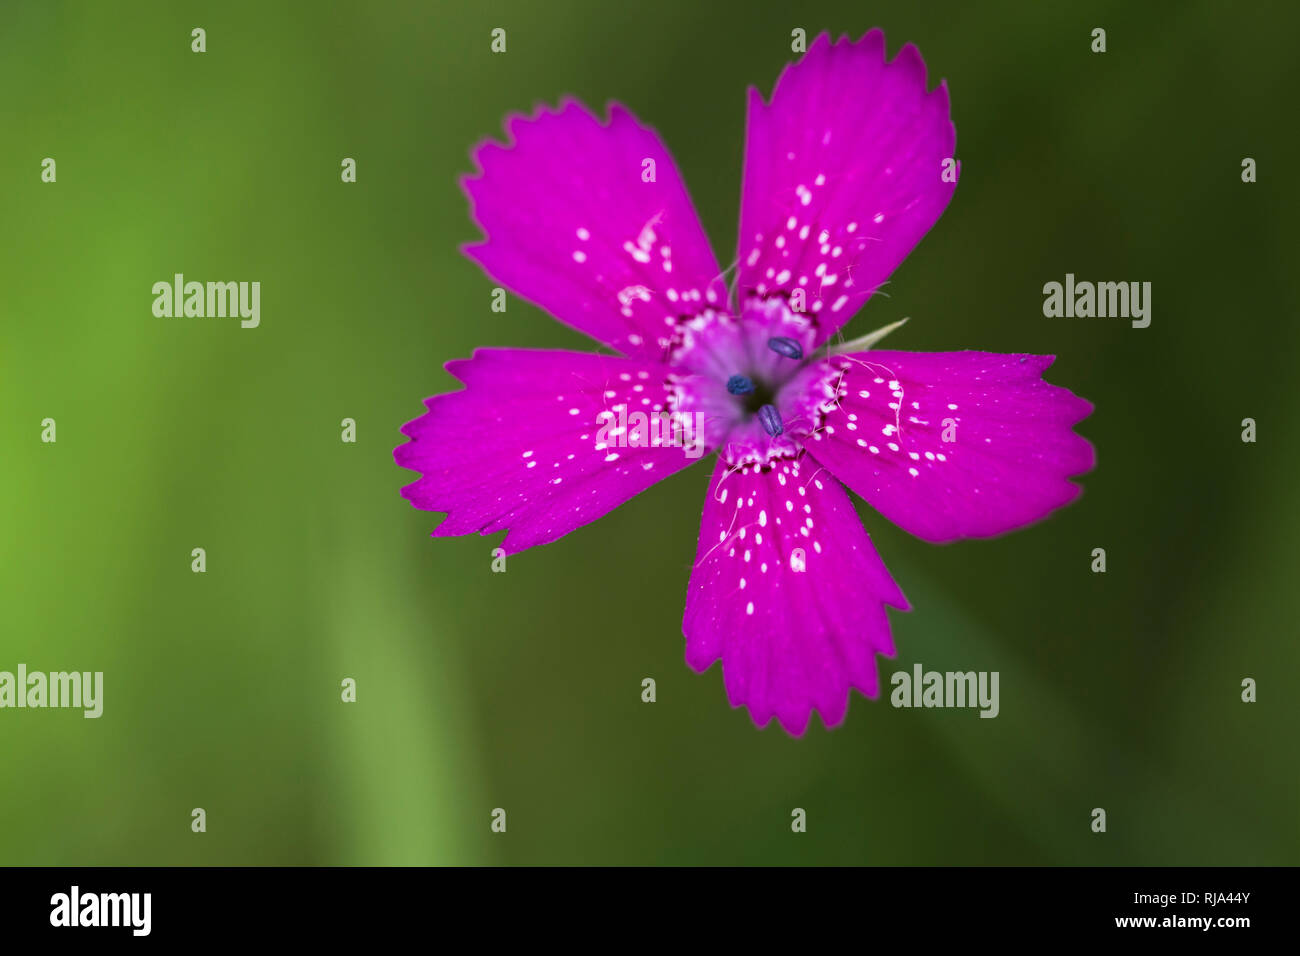 single blossom of carnation, Dianthus deltoides, close-up, exemption, Stock Photo